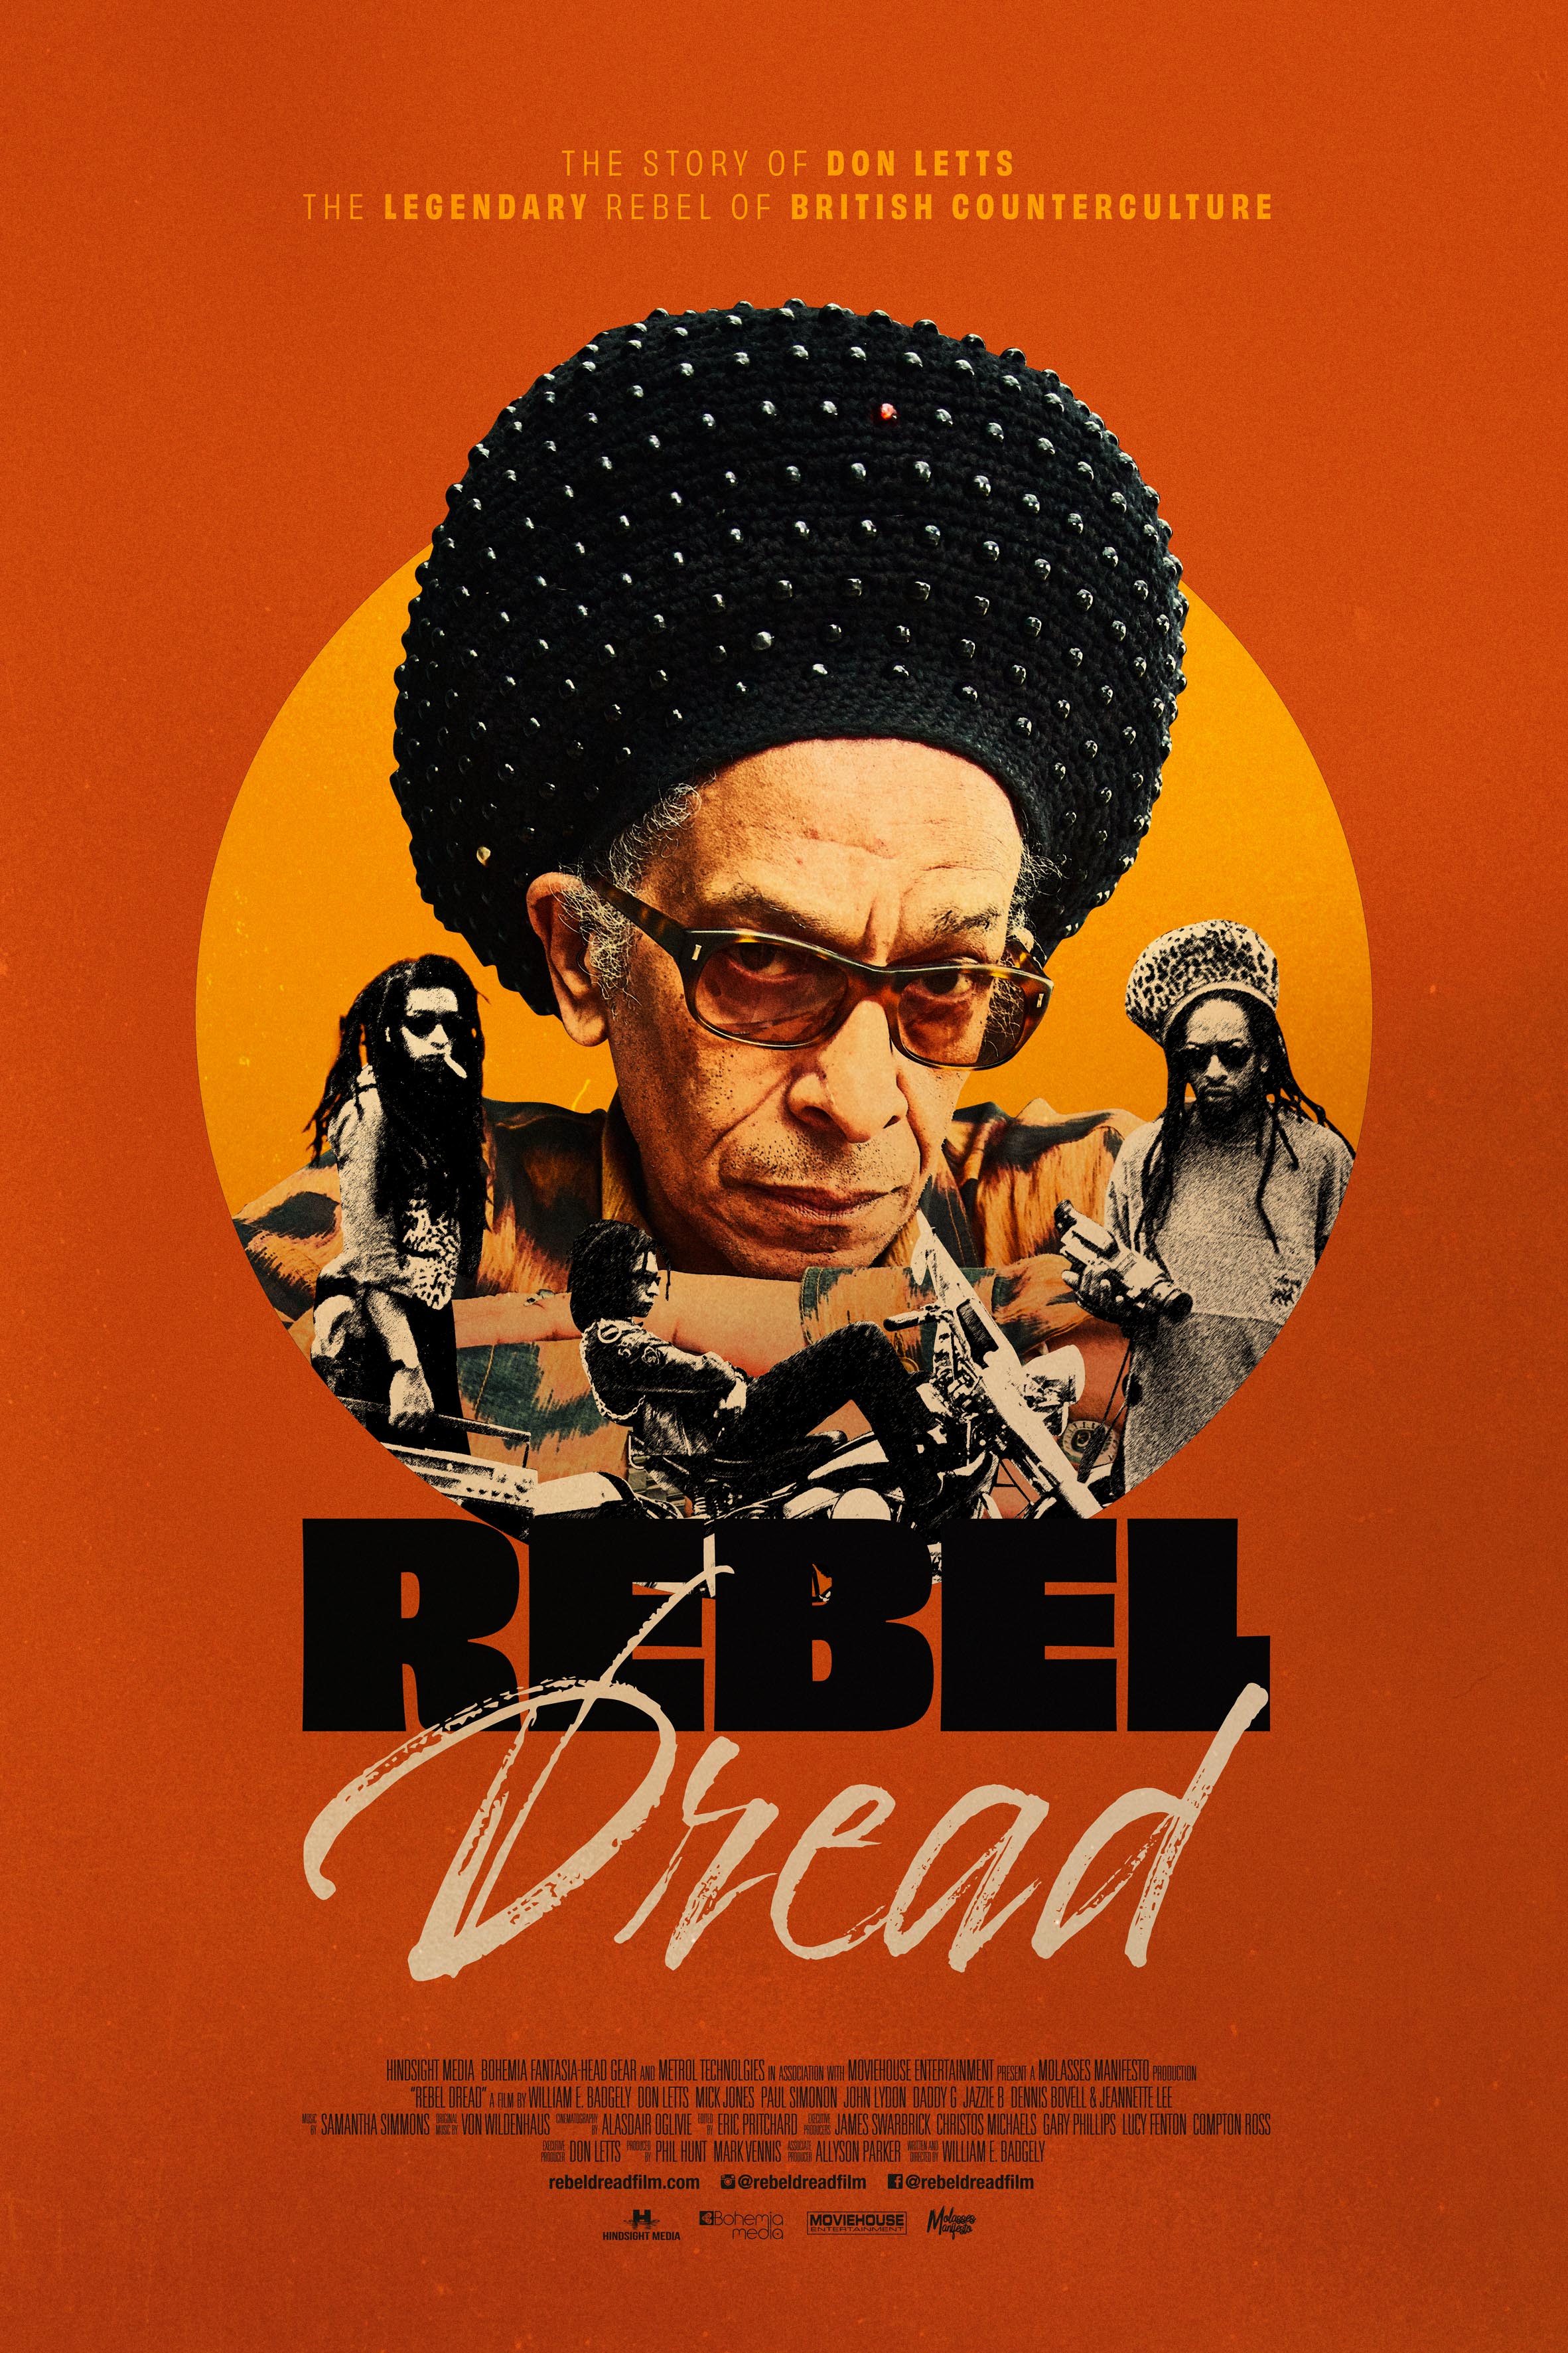 Rebel Dread - The Don Letts Collection - Utility Token - D - (Edition of 12)